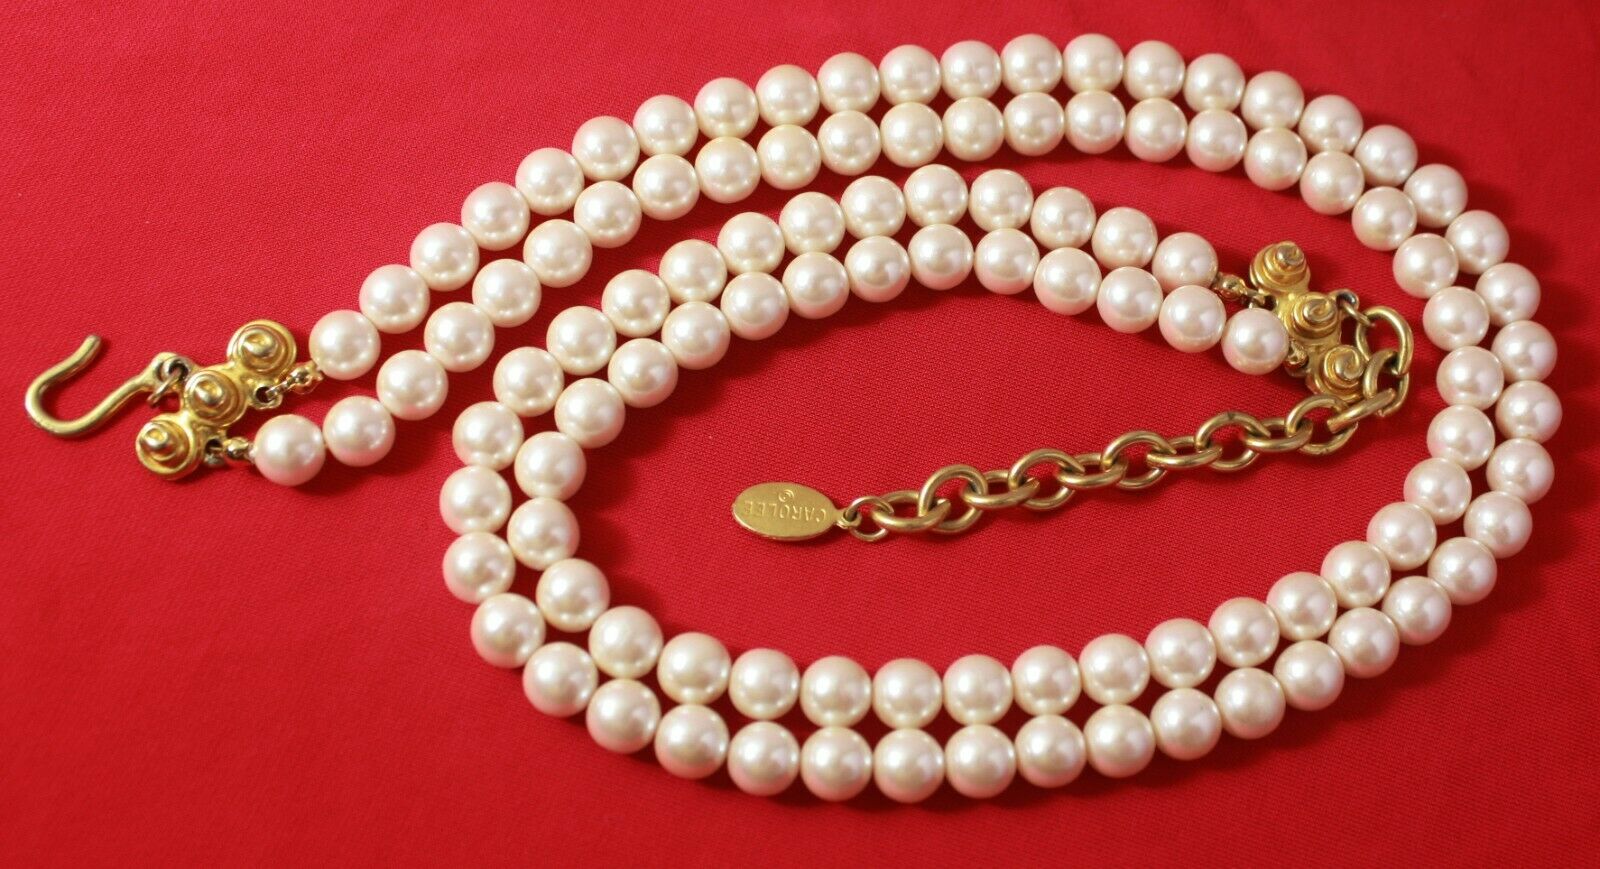 Vintage Signed Carolee Double Strand Faux Pearls Necklace 21.5"